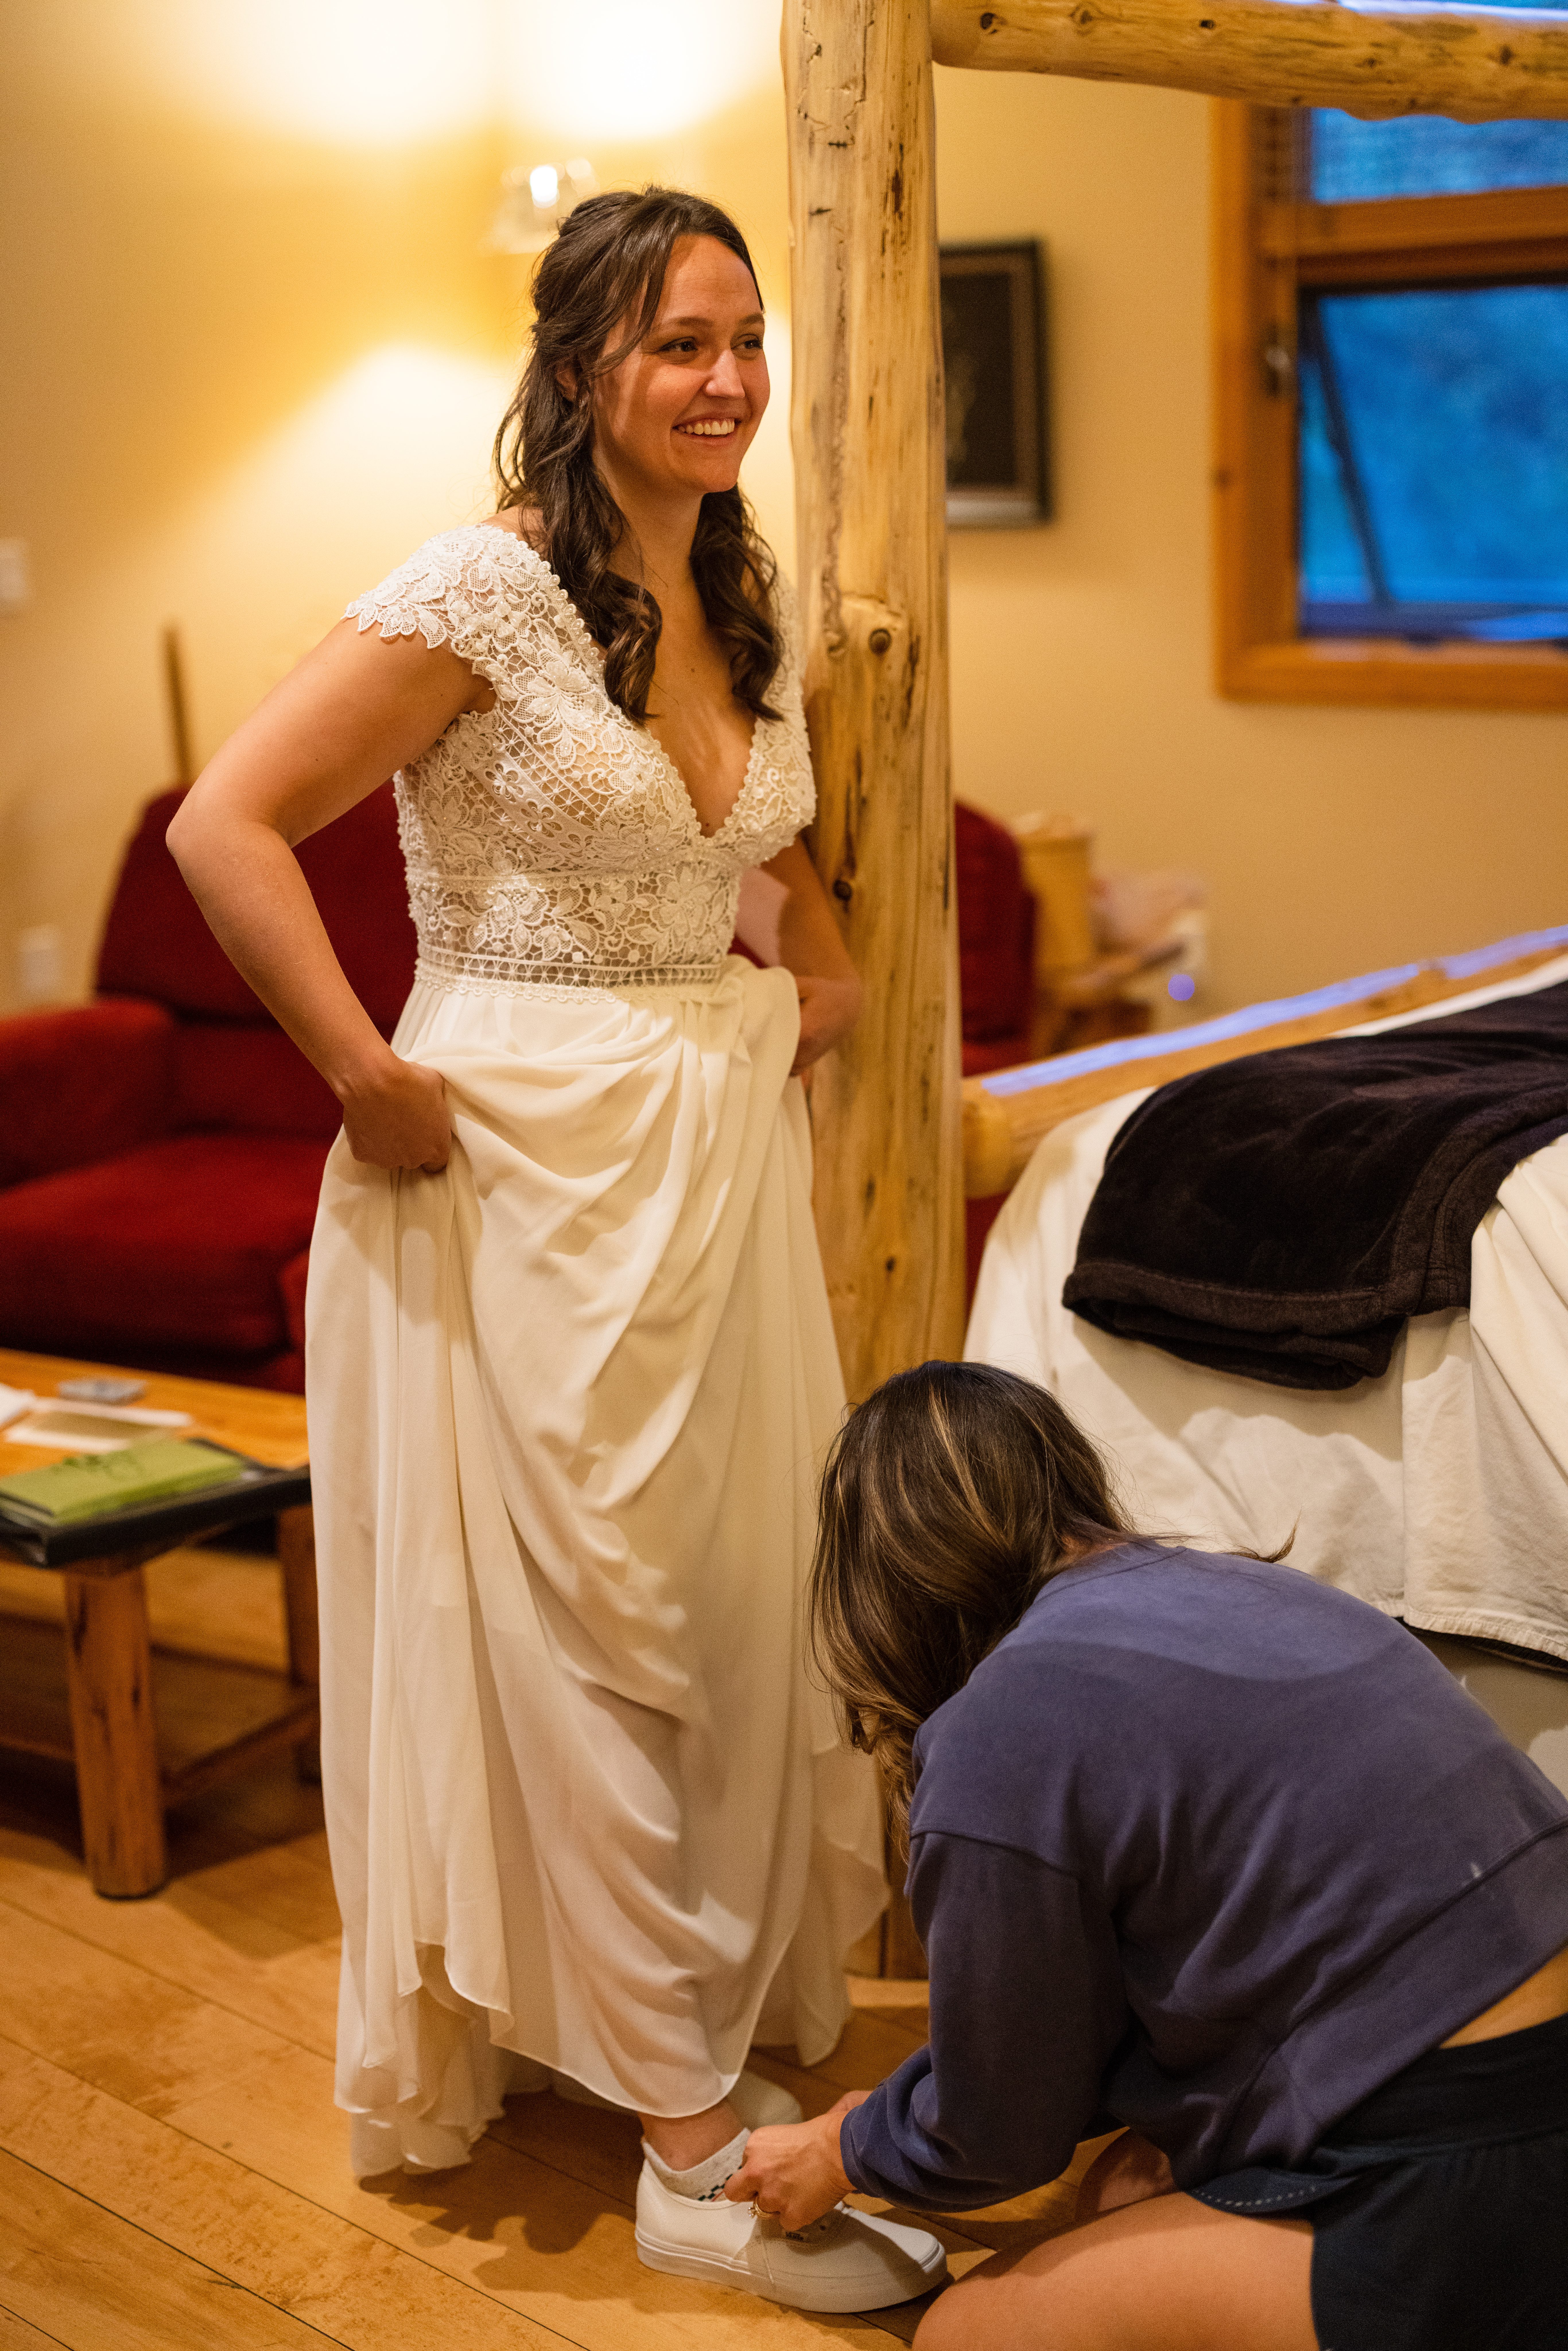 The beautiful bride finishes getting ready at Romantic RiverSong Inn in Estes Park for her wedding 